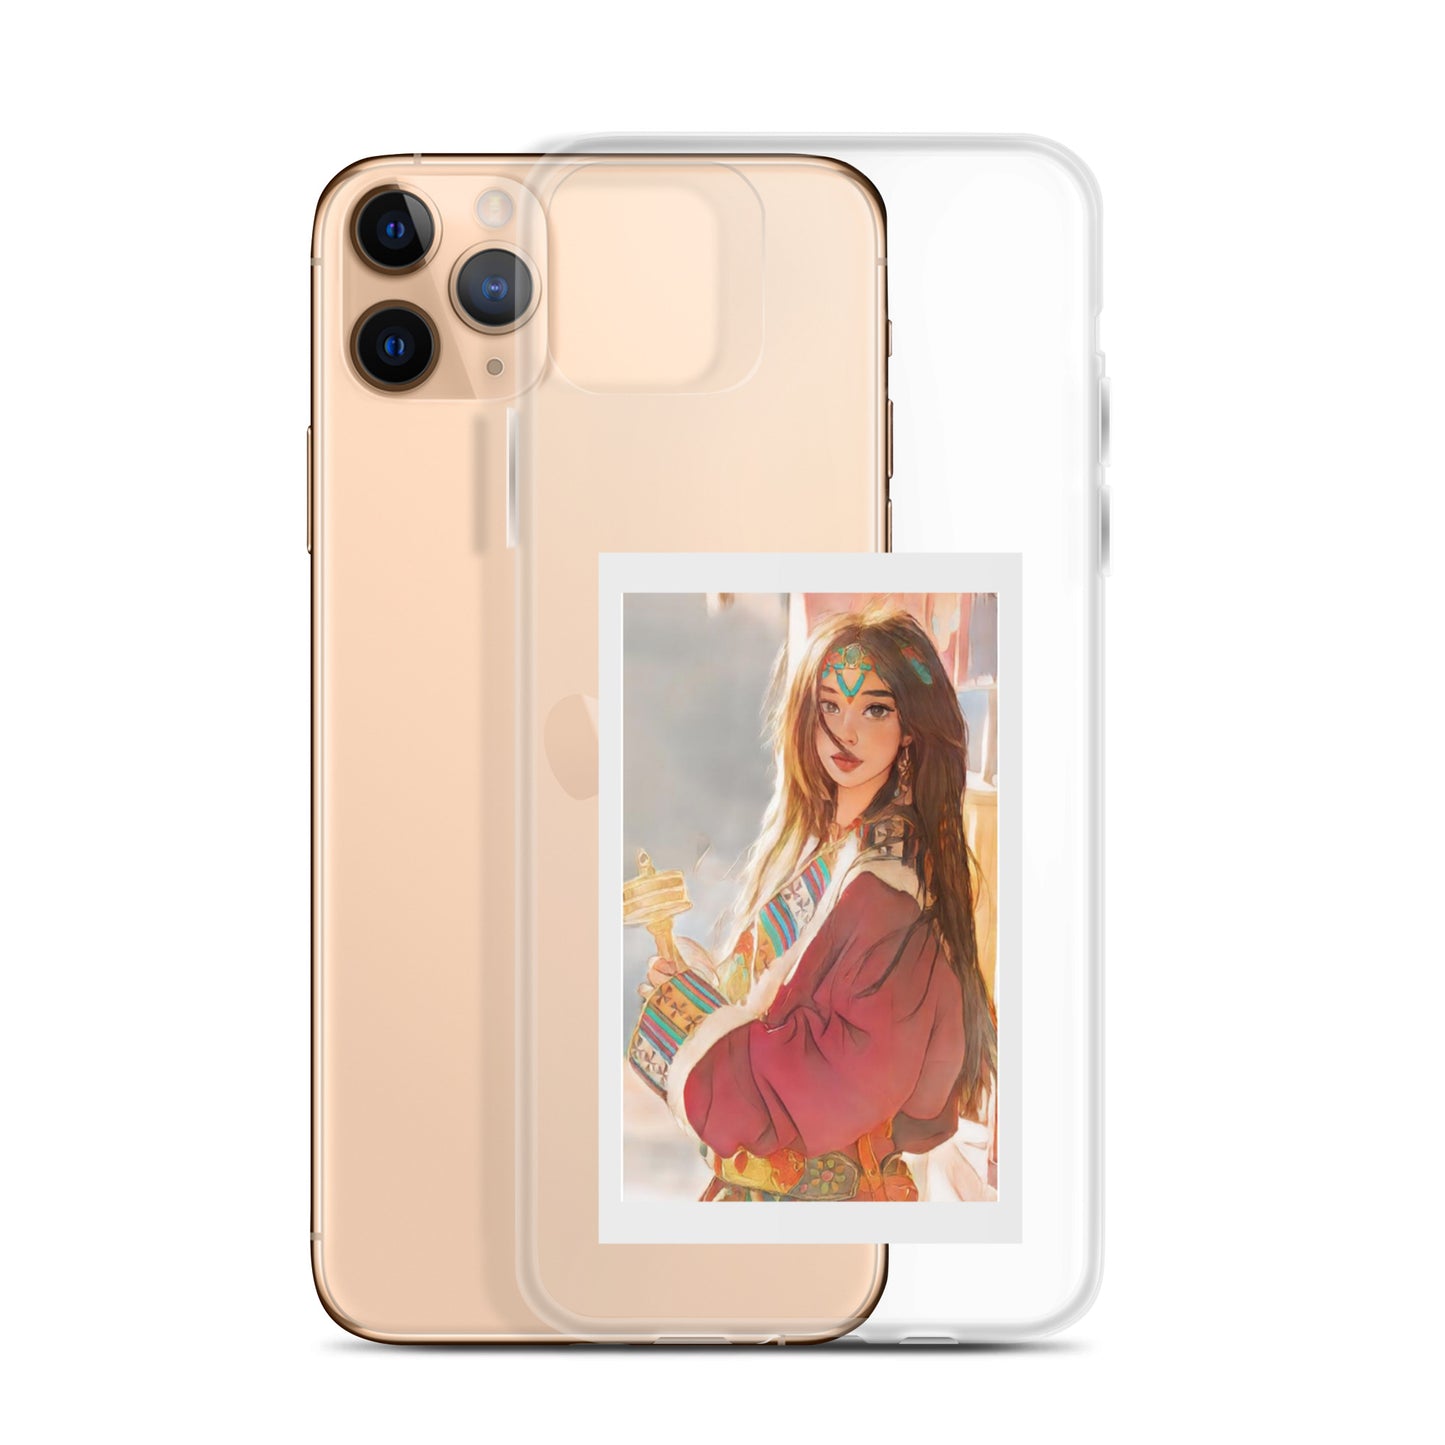 TIBETAN GIRL iPhone CASE are designed under Dzimig Studios' Tibetan Archive Project. This sleek iPhone® case protects your phone from scratches, dust, oil, and dirt.